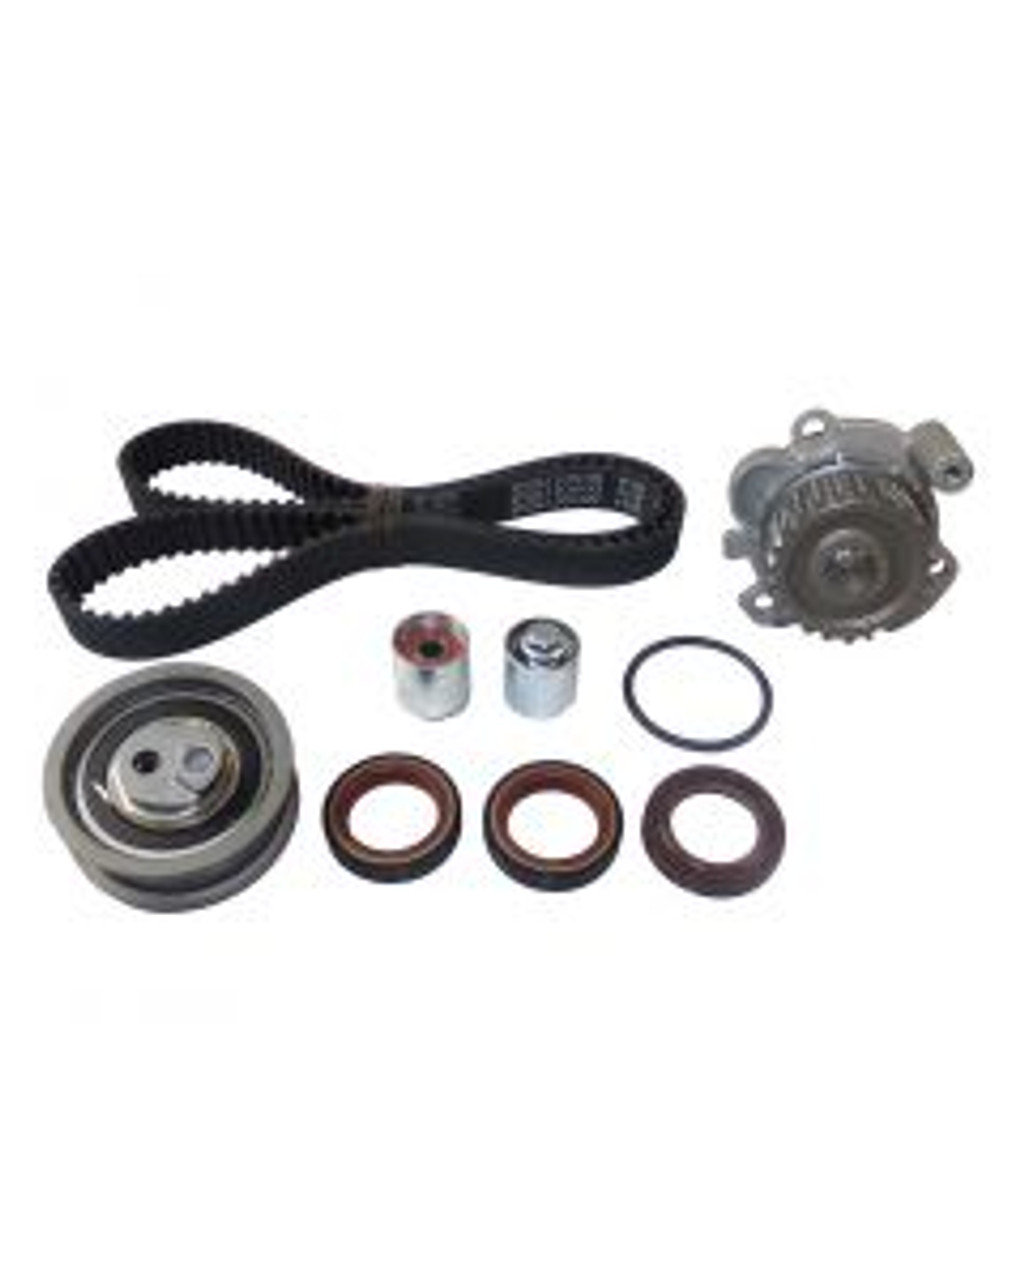 Timing Belt Kit with Water Pump 2.0L 2008 Volkswagen Eos - TBK802WP.24